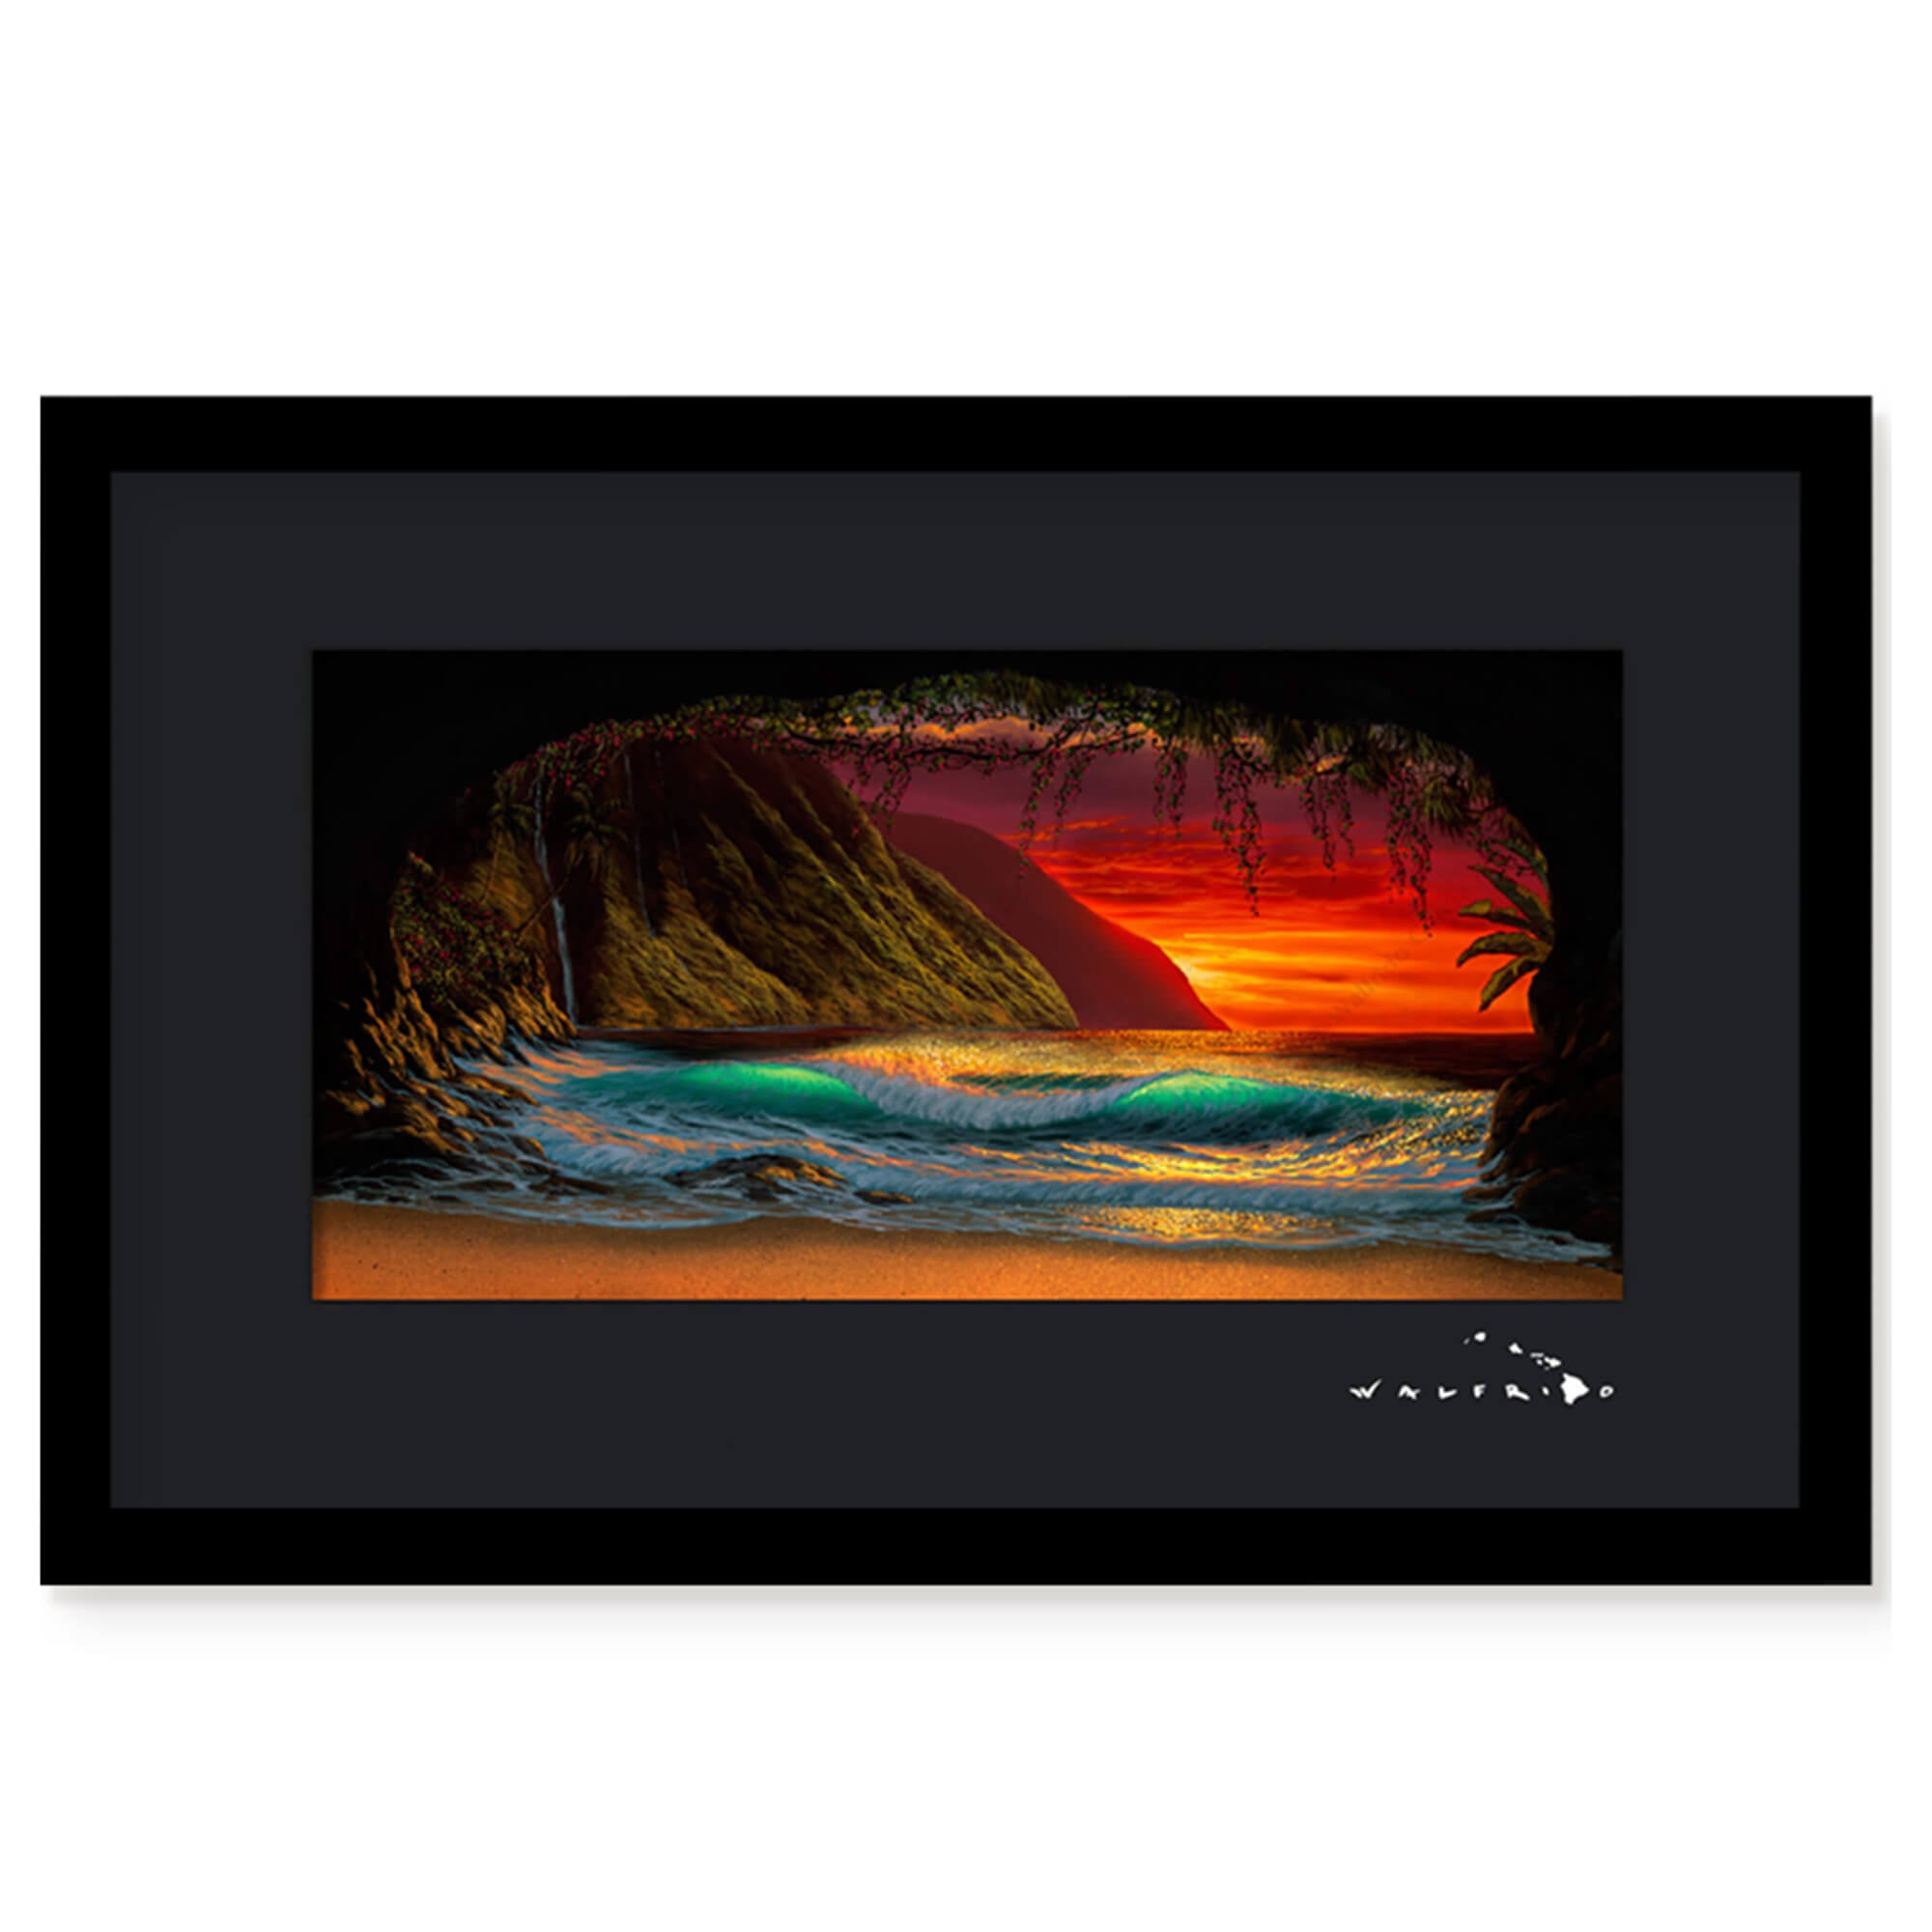 Framed matted art print of the ocean and tropical Hawaiian landscape at sunset as seen from a cave on the beach by Hawaii artist Walfrido Garcia